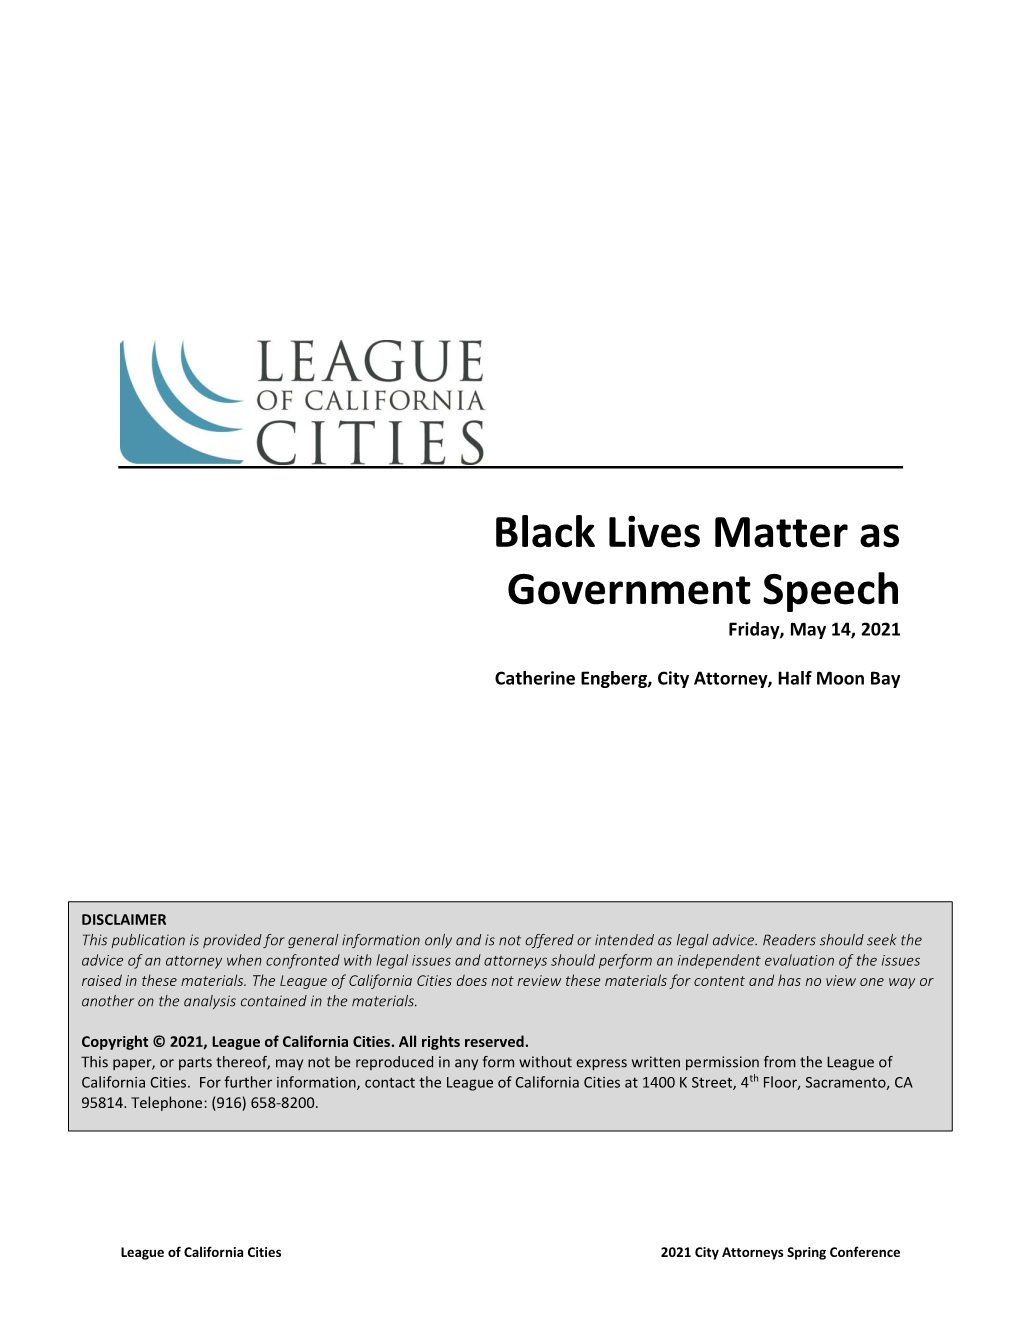 Black Lives Matter As Government Speech Friday, May 14, 2021